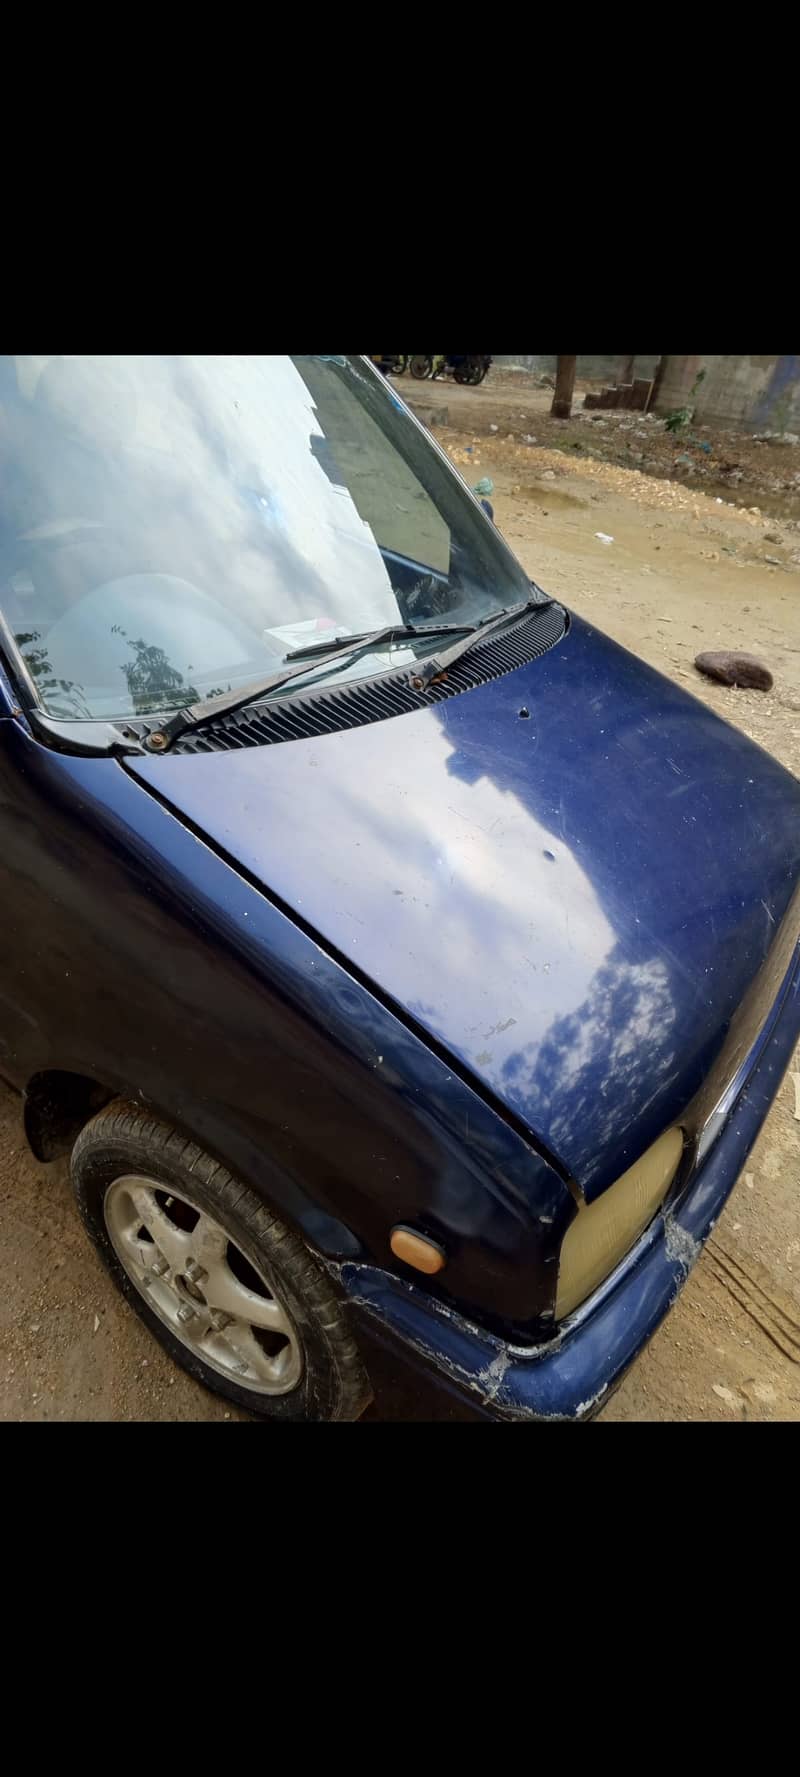 Mira car for sale 93 model cplc clear 4